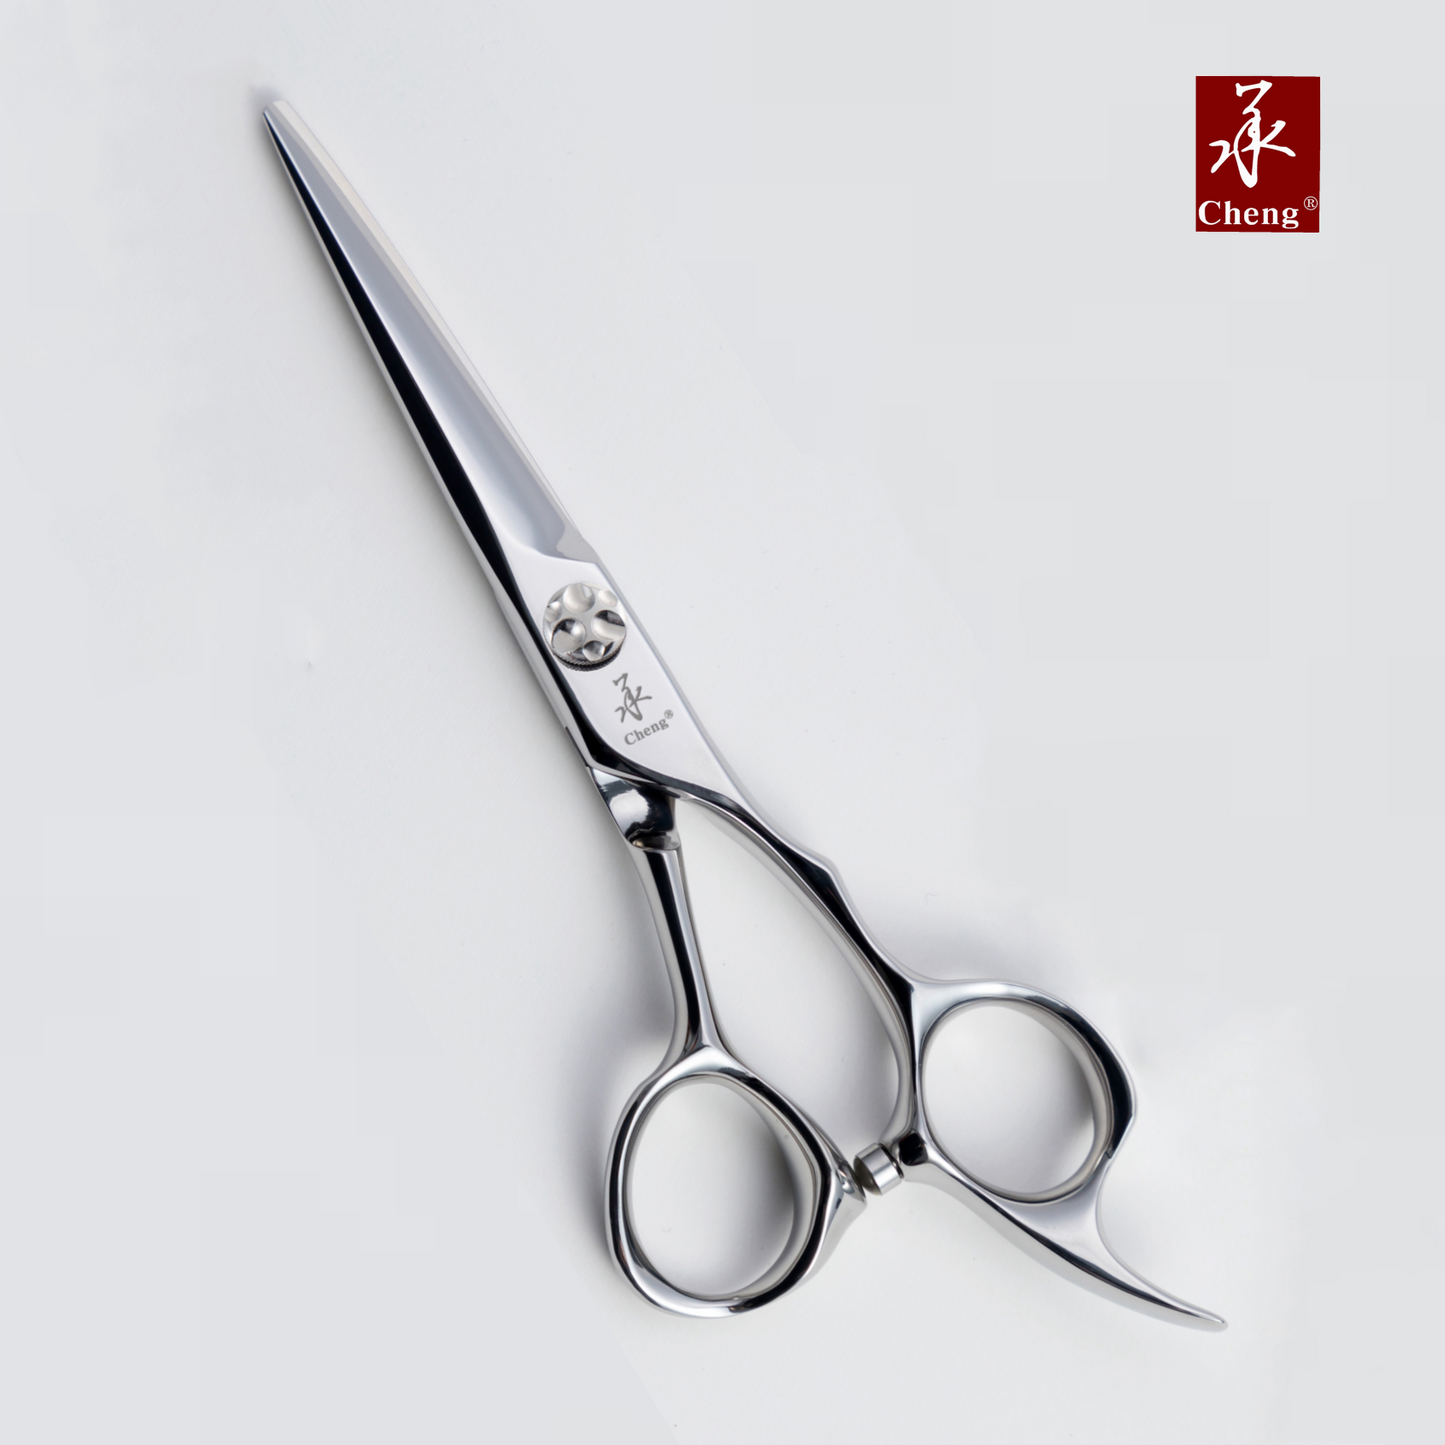 VD-625XS Hair Thinning Scissors 6.0 Inch 25T About=10%